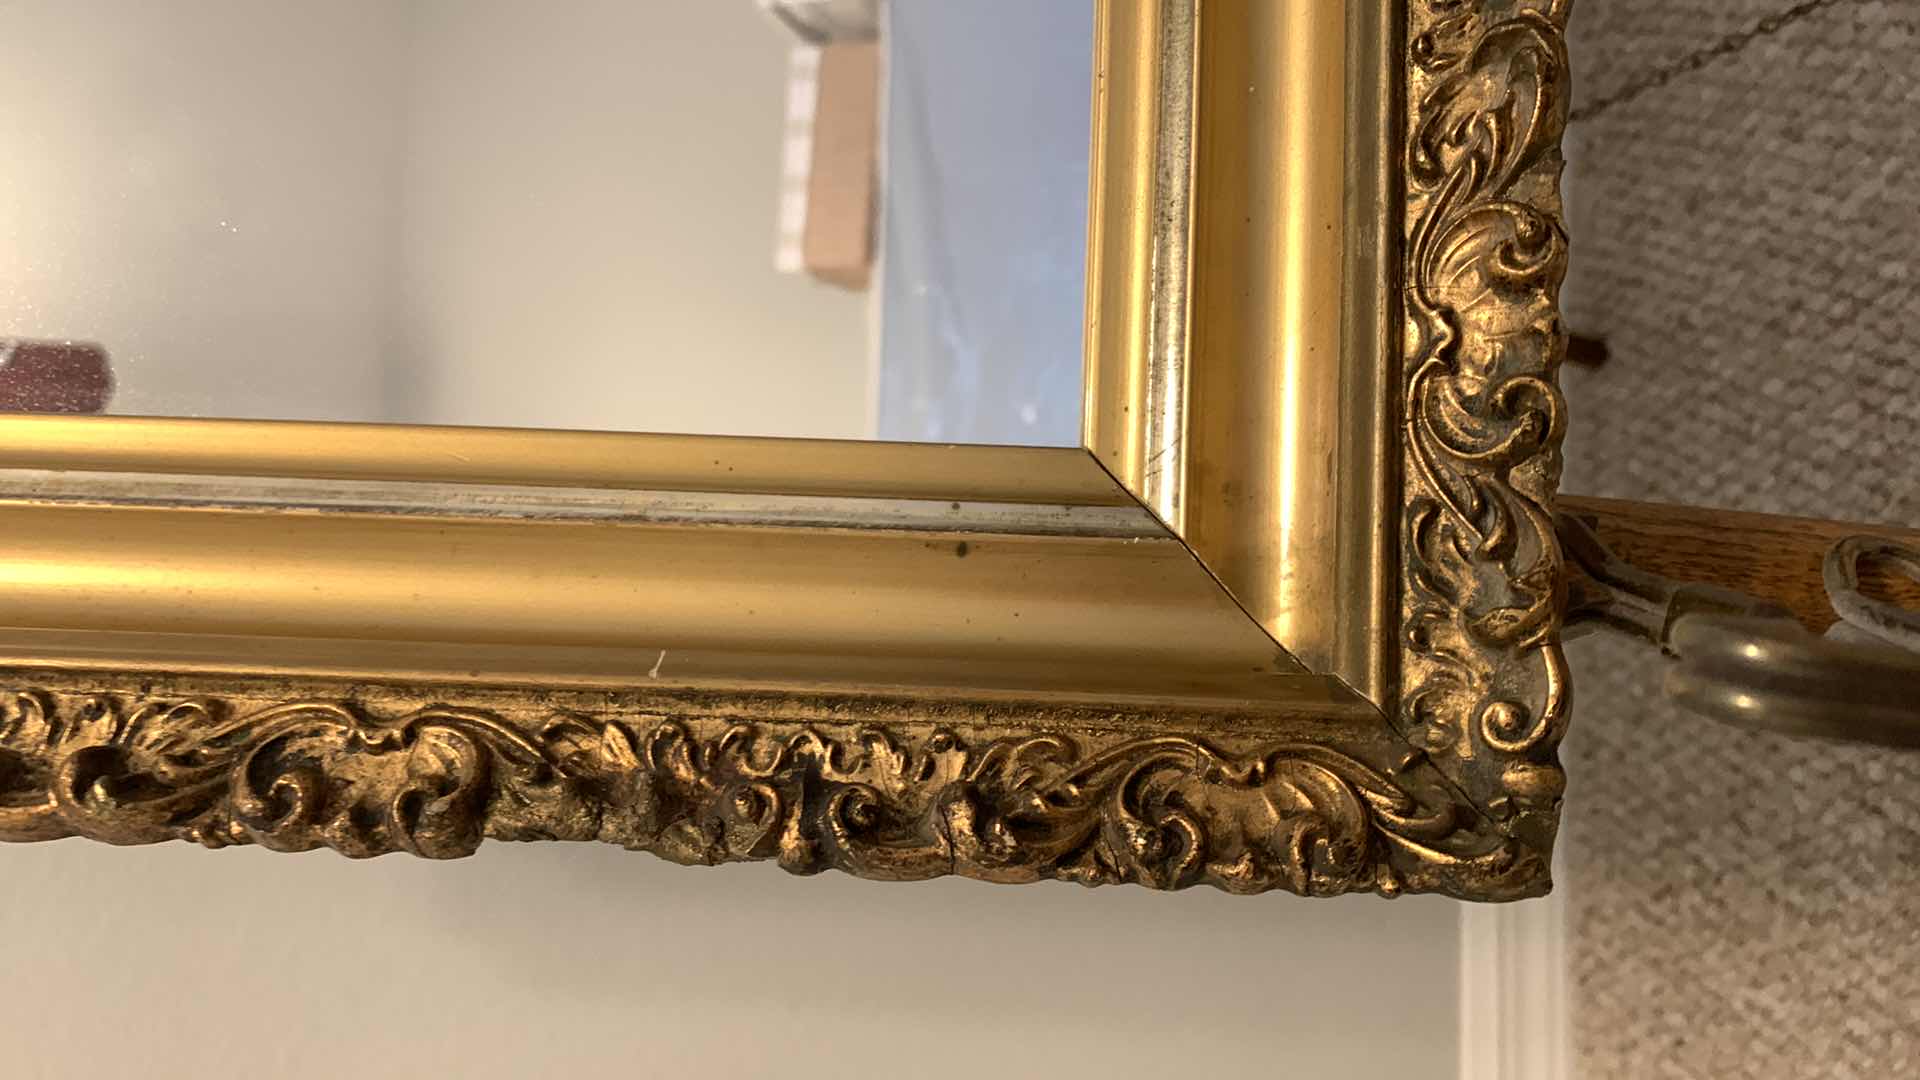 Photo 2 of VINTAGE MIRROR IN ORNATE GOLD FRAME 20.5” x 27.5” (stand not included)